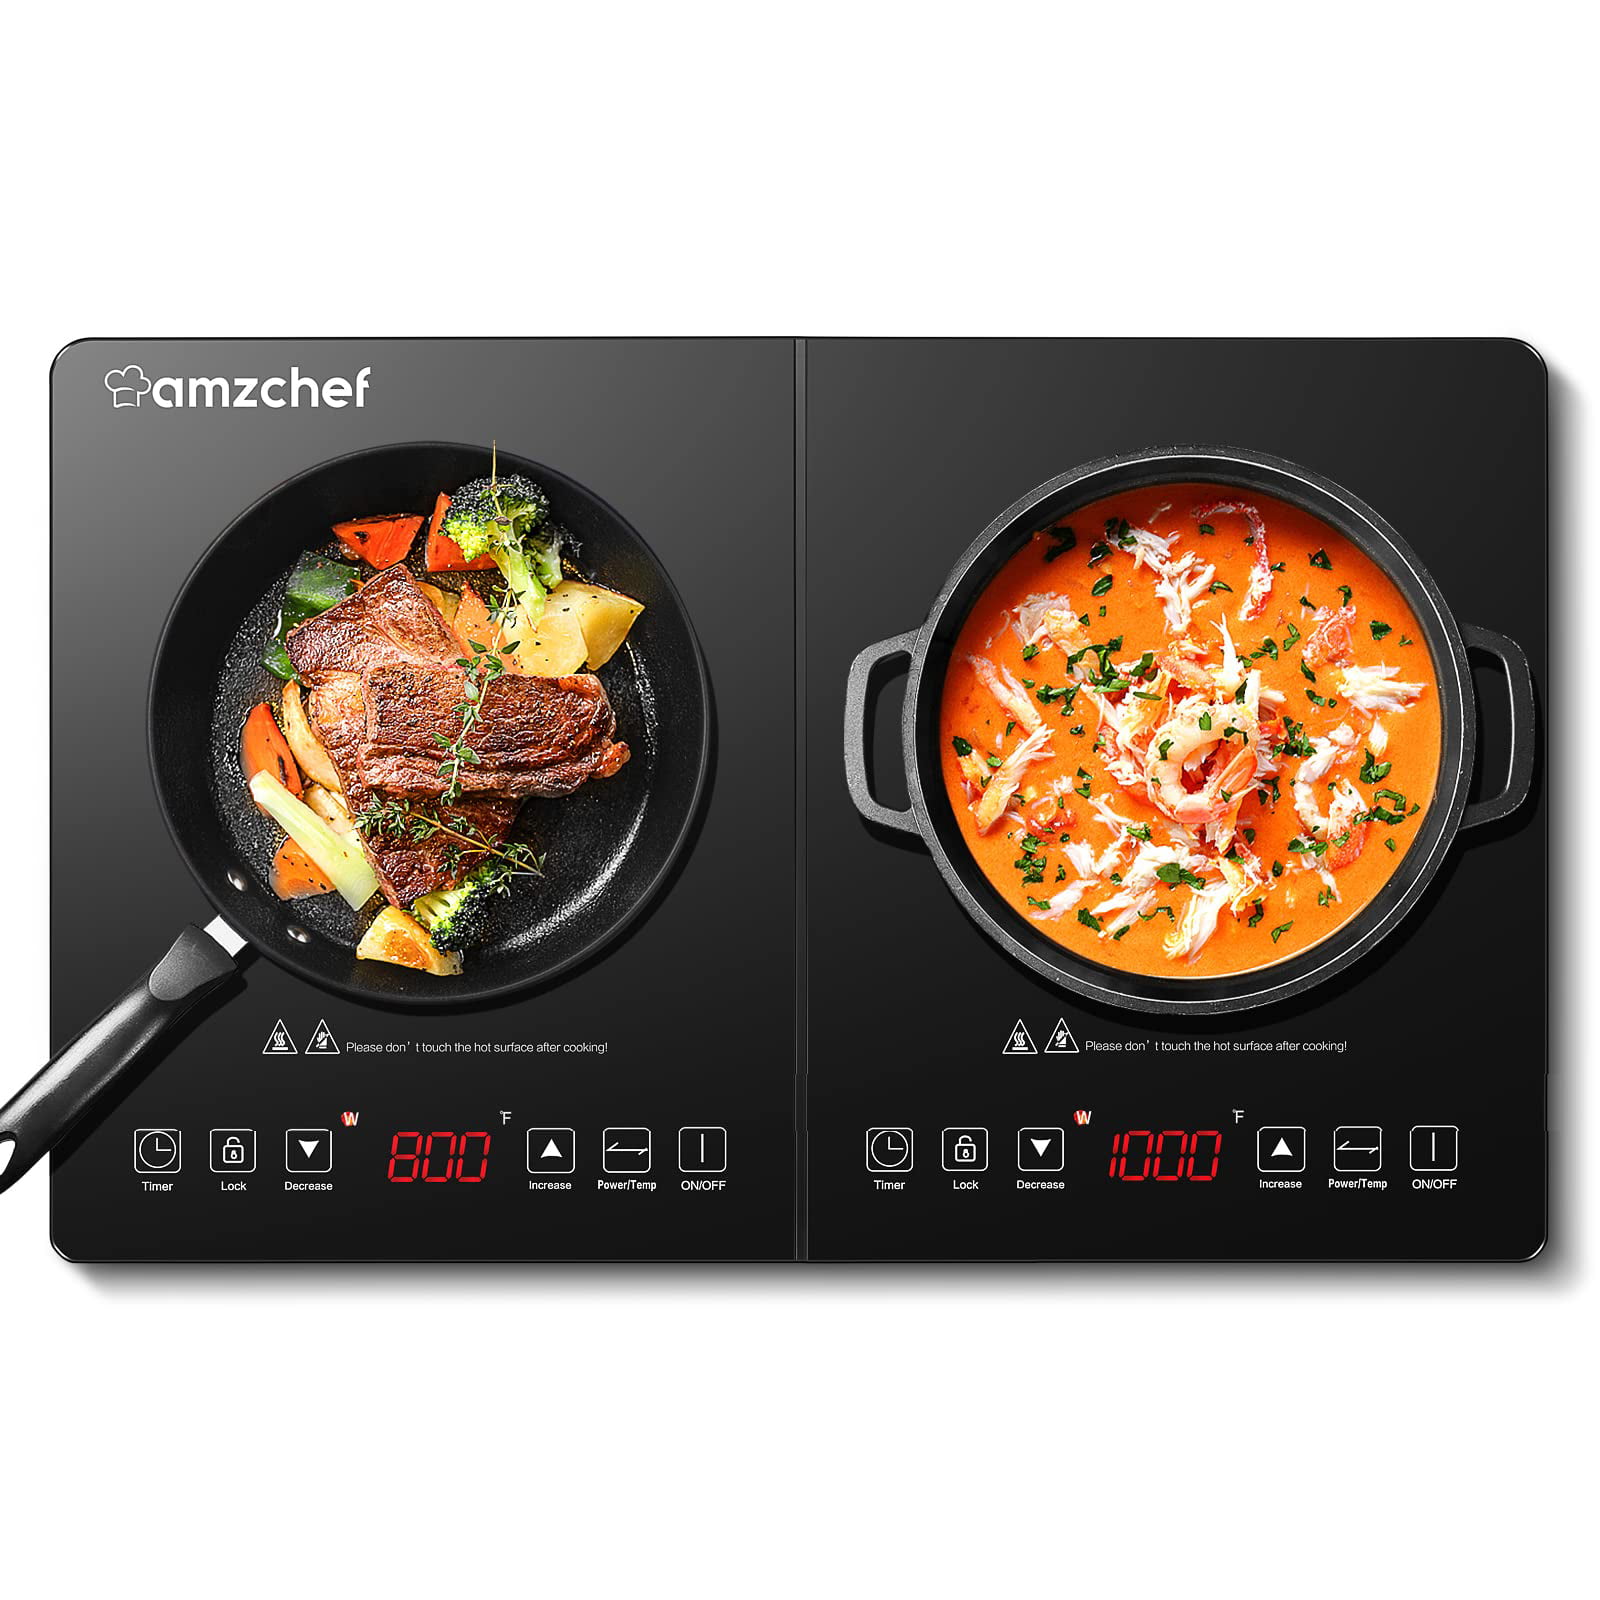 Portable Induction Cooktop AMZCHEF Induction Burner Cooker With